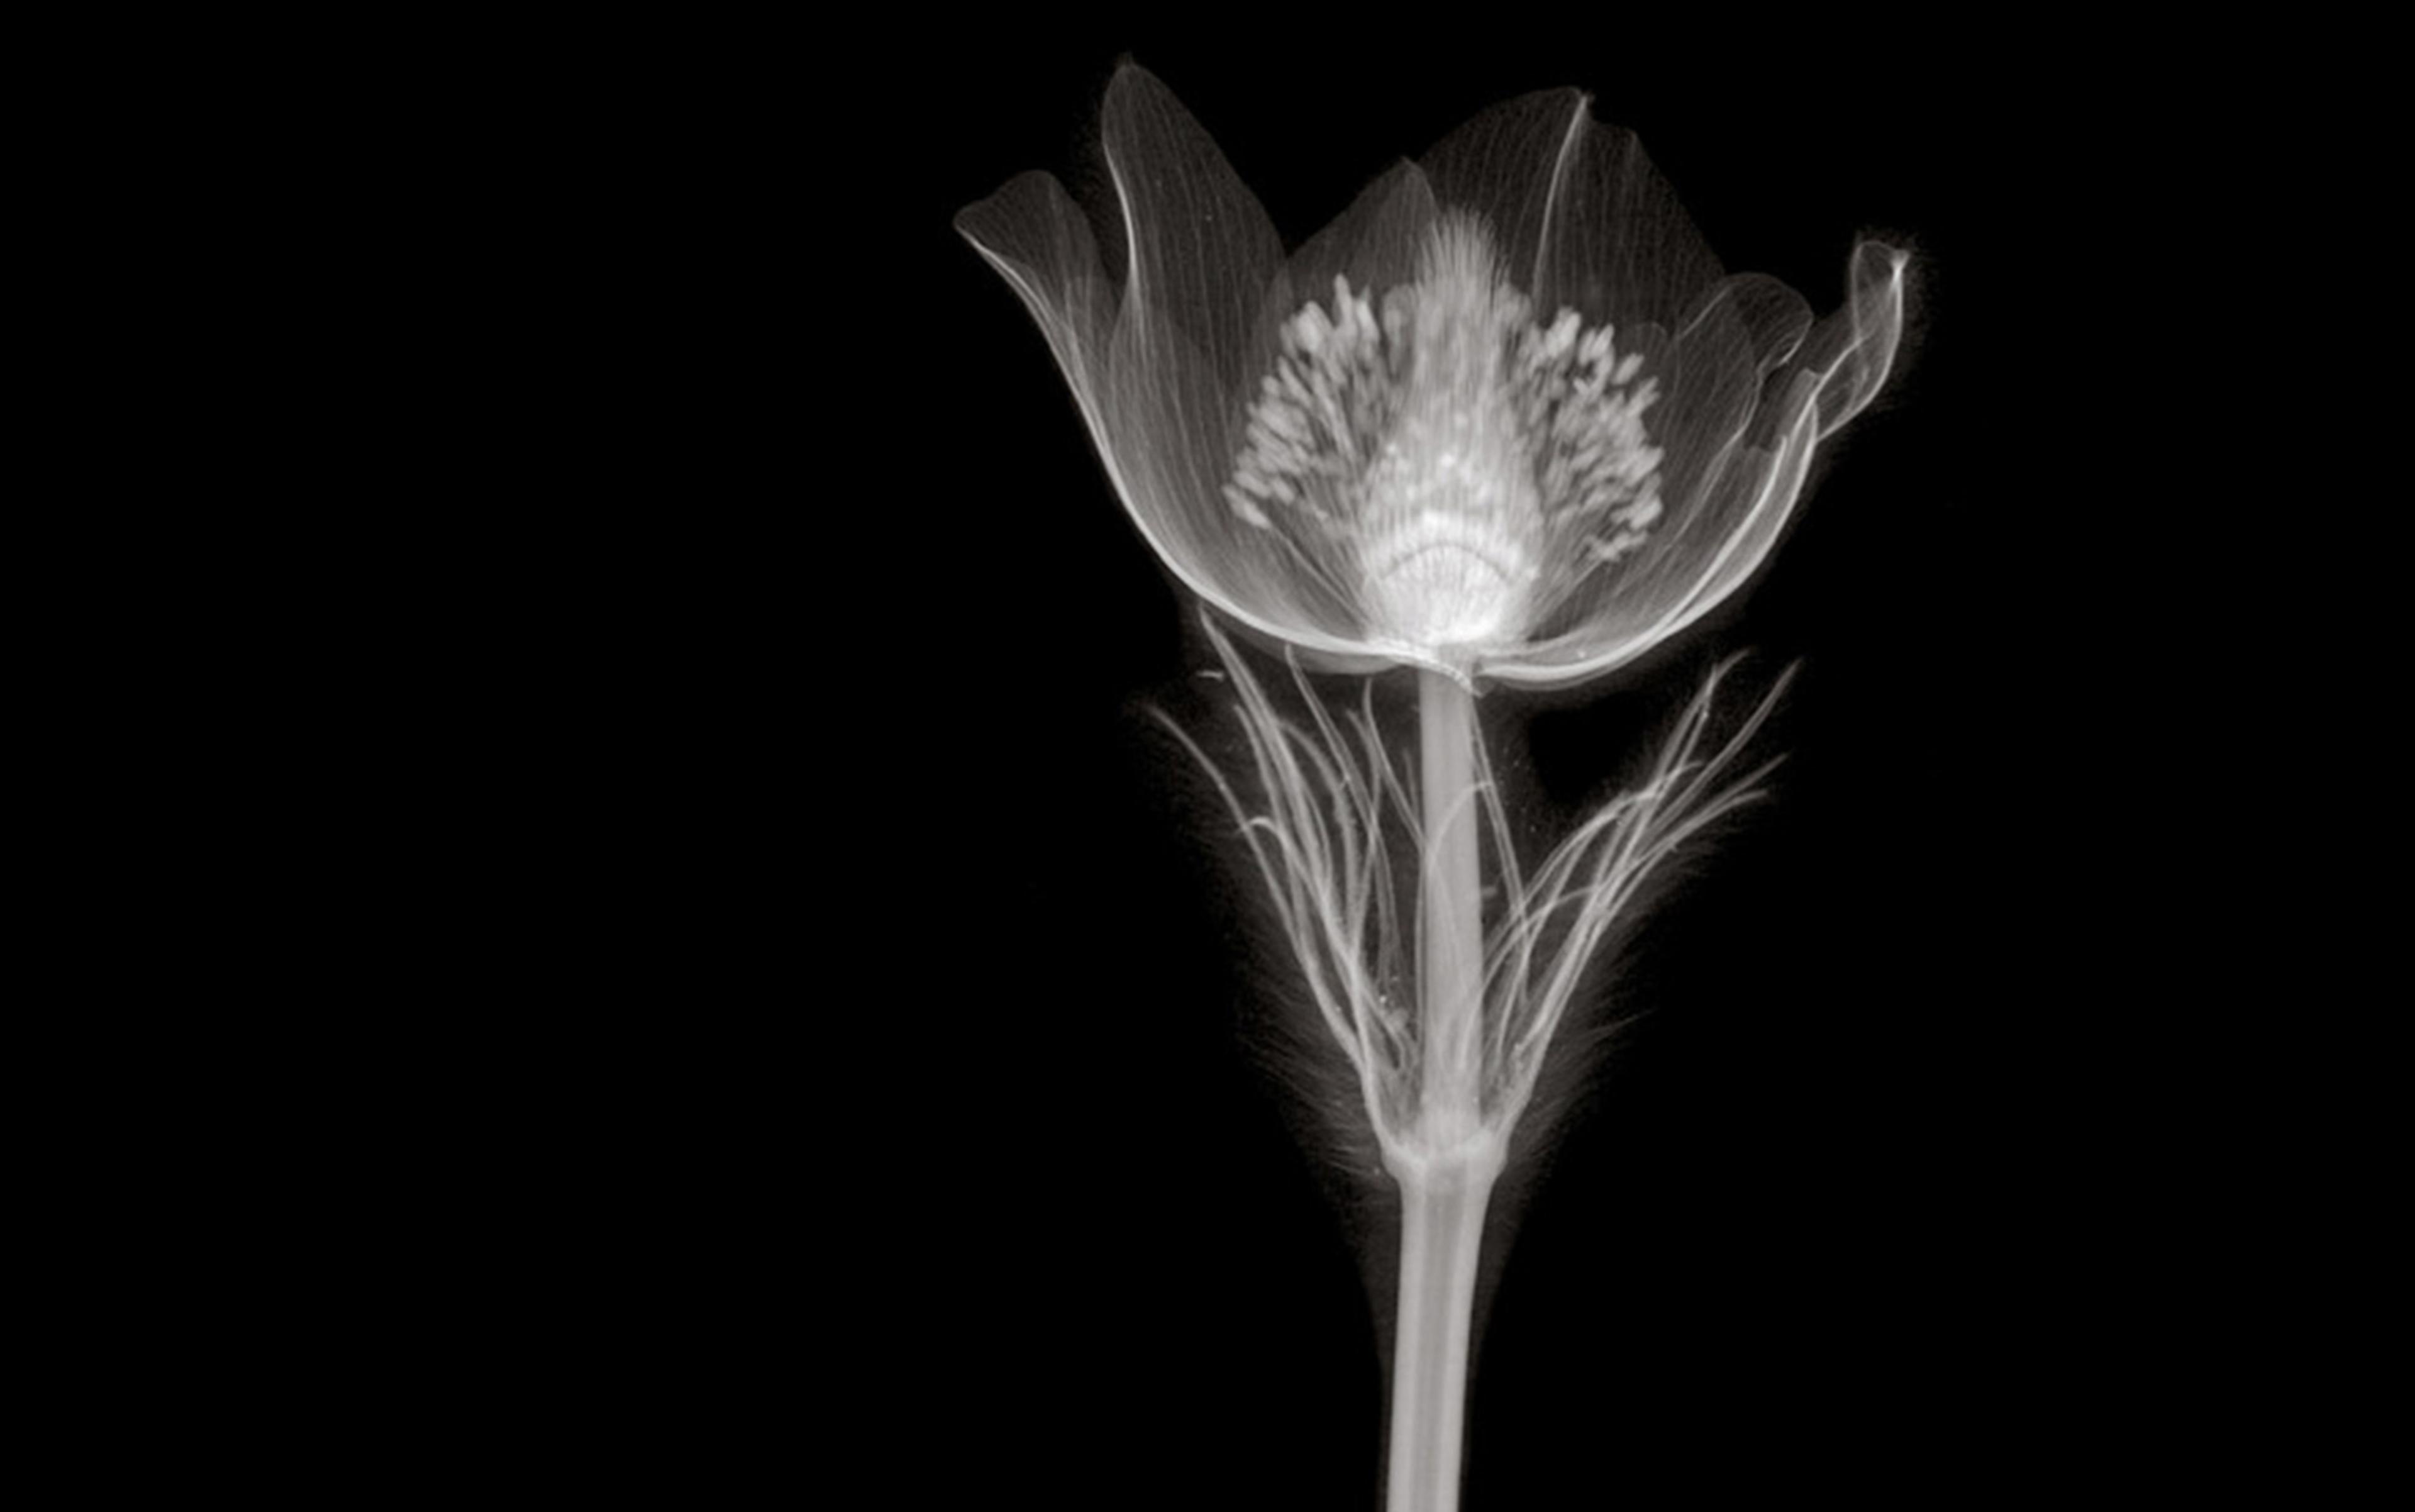 X-ray image of a single flower with visible petals, stem, and internal structures on a black background.